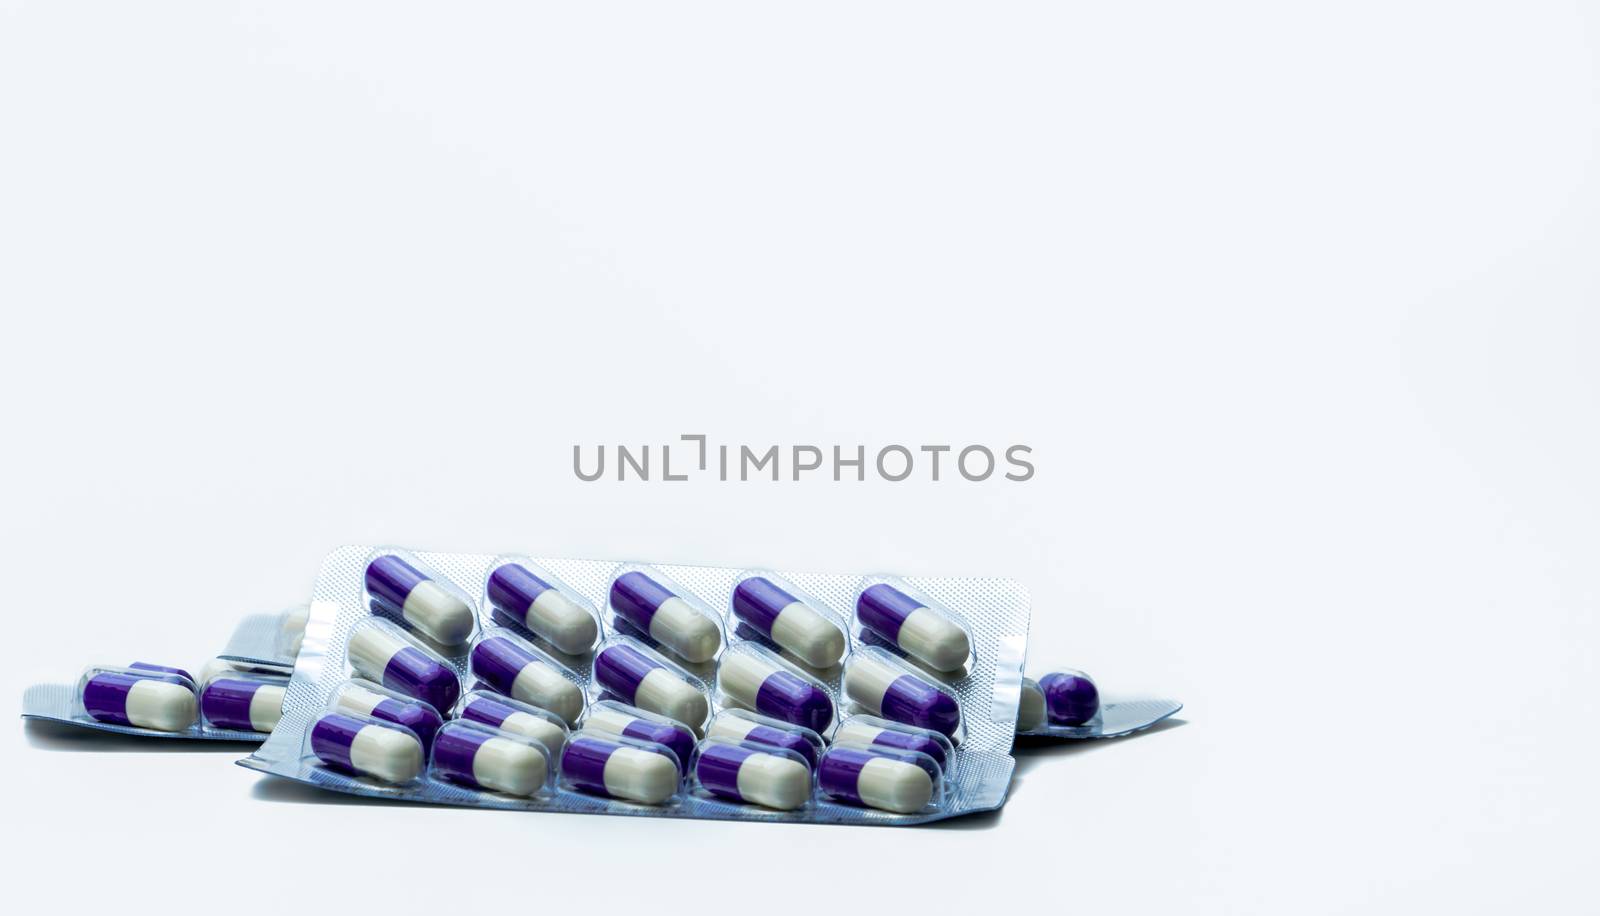 Fluconazole : Antifungal medicine. Heap of pills in blister packs on white background. Healthcare concept. Medicine pills can cause liver damage. Pharmaceutical industry background. by Fahroni